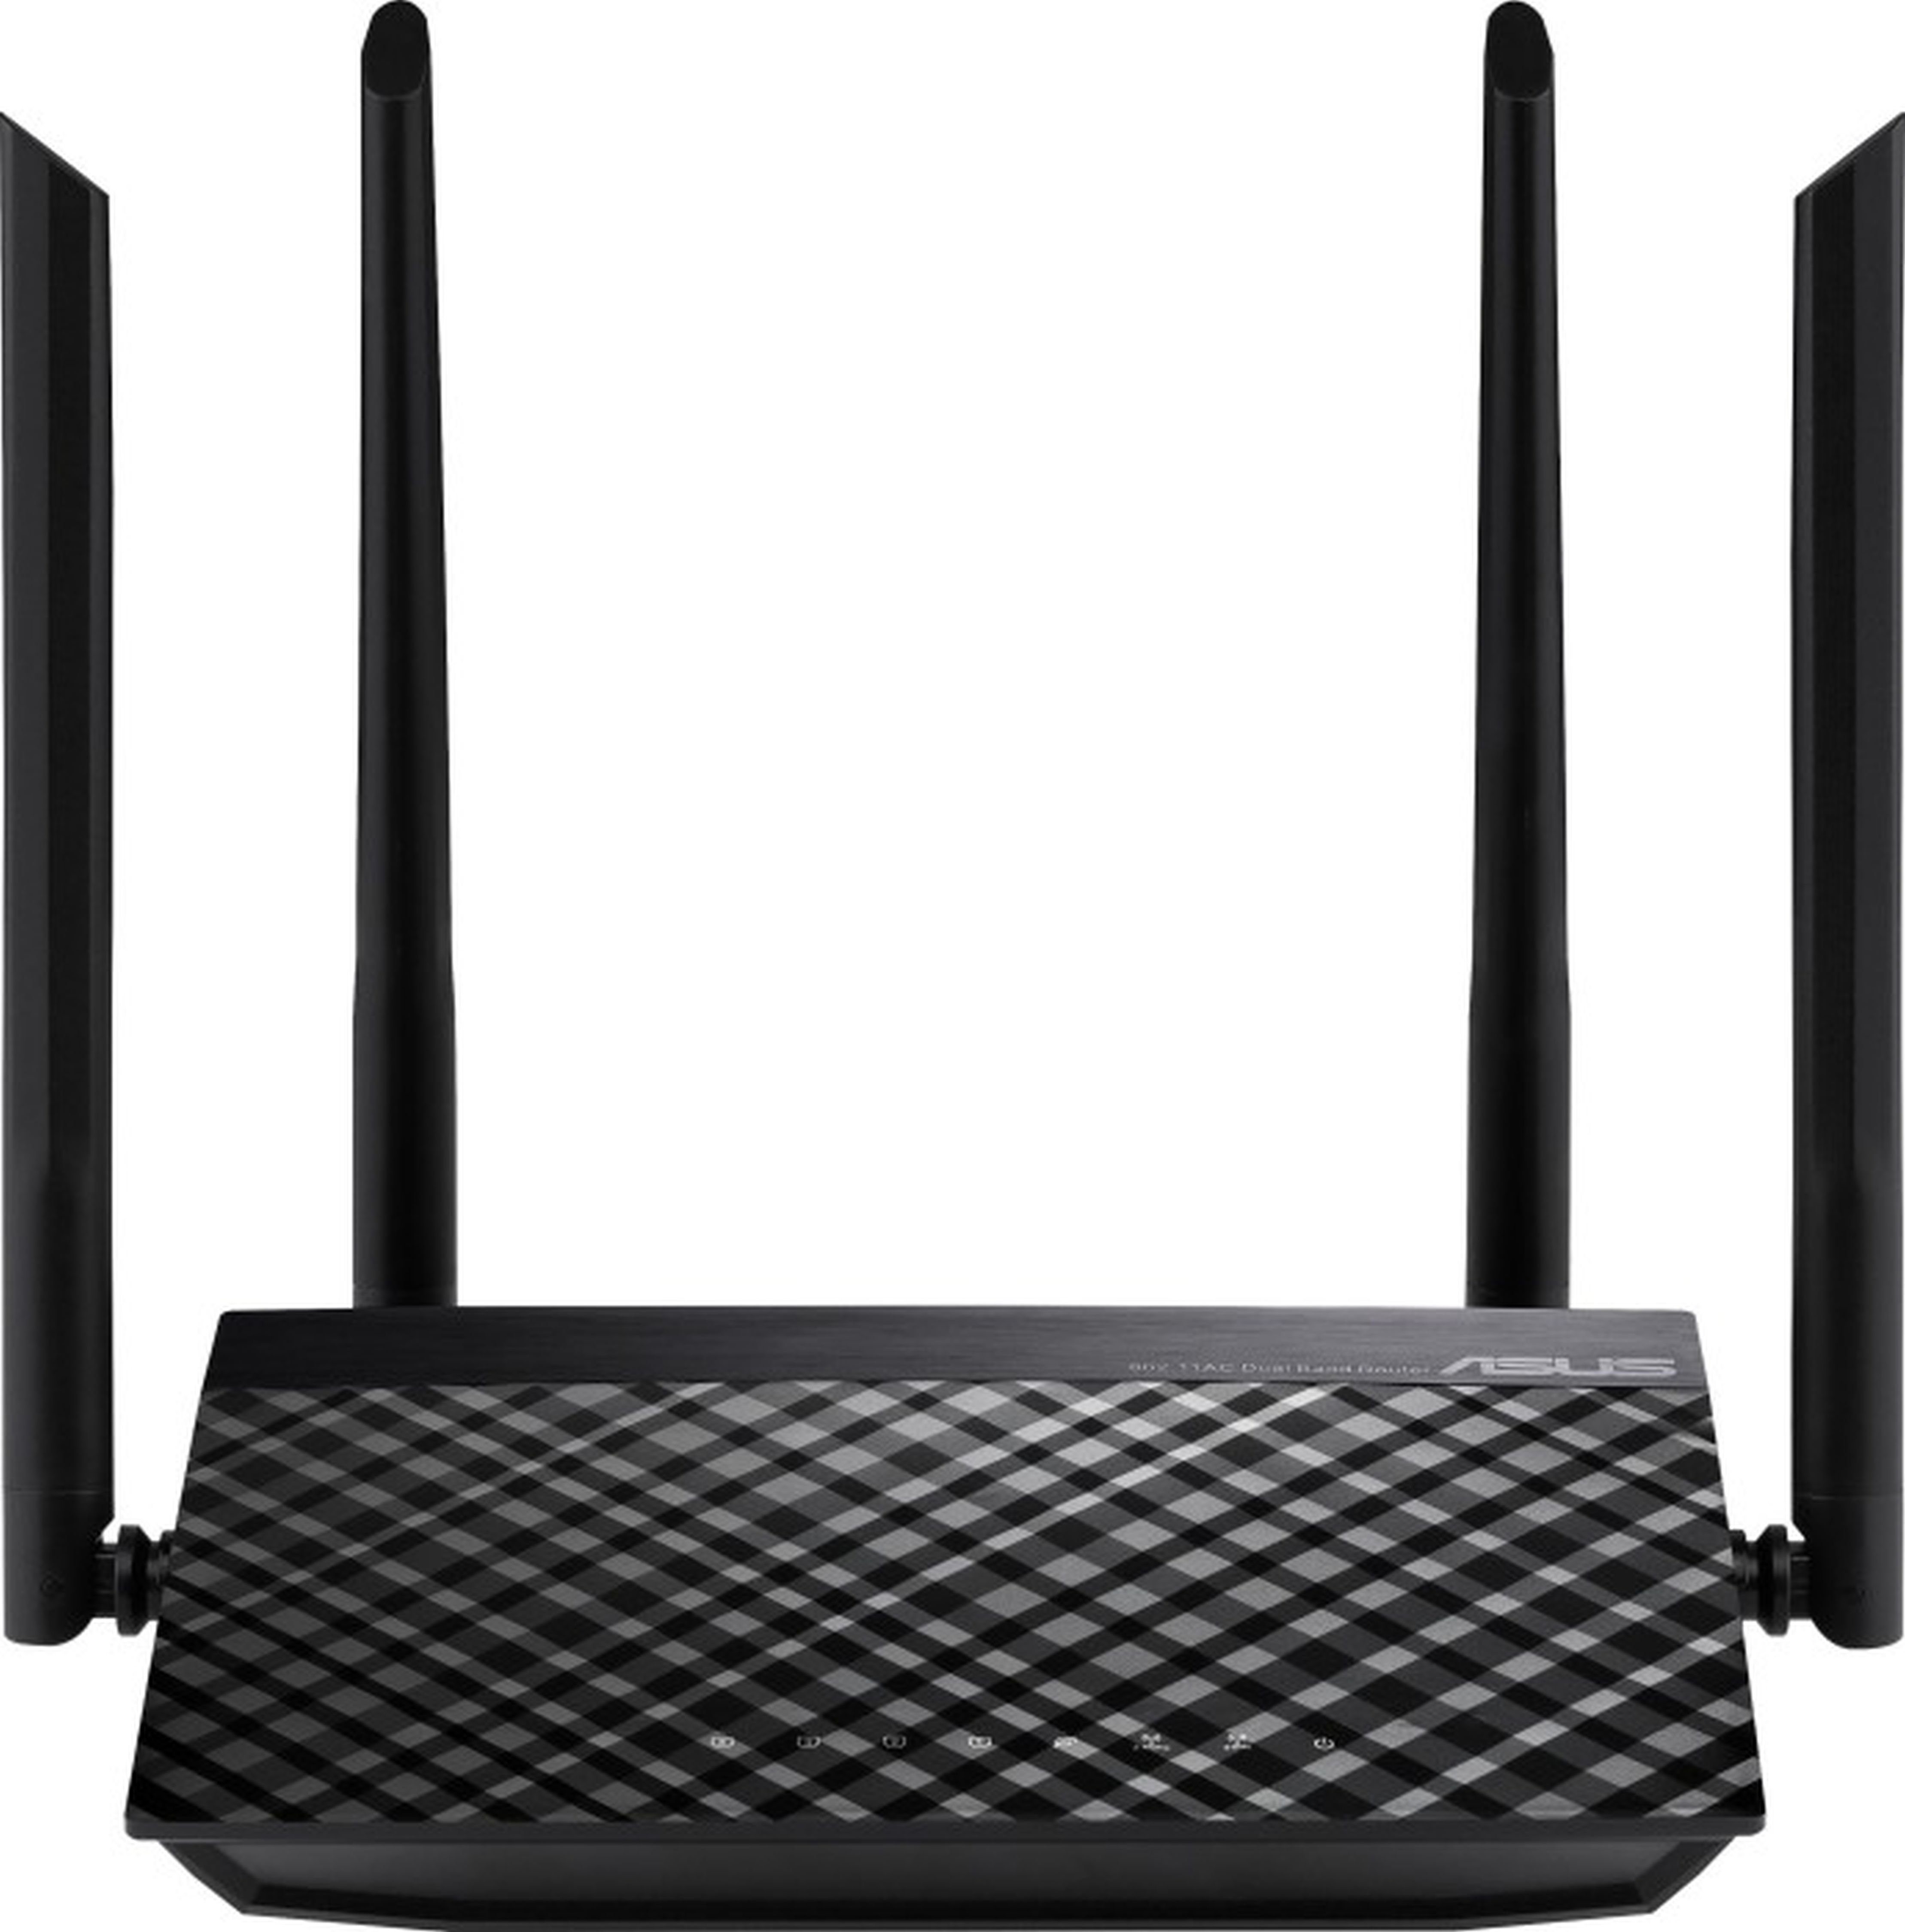 Asus »WiFi 5 AC1200 MIMO,4x Fast Ethernet LAN,DFS,IPv6)« WLAN-Router,  RT-AC1200 v2 Router online kaufen | OTTO